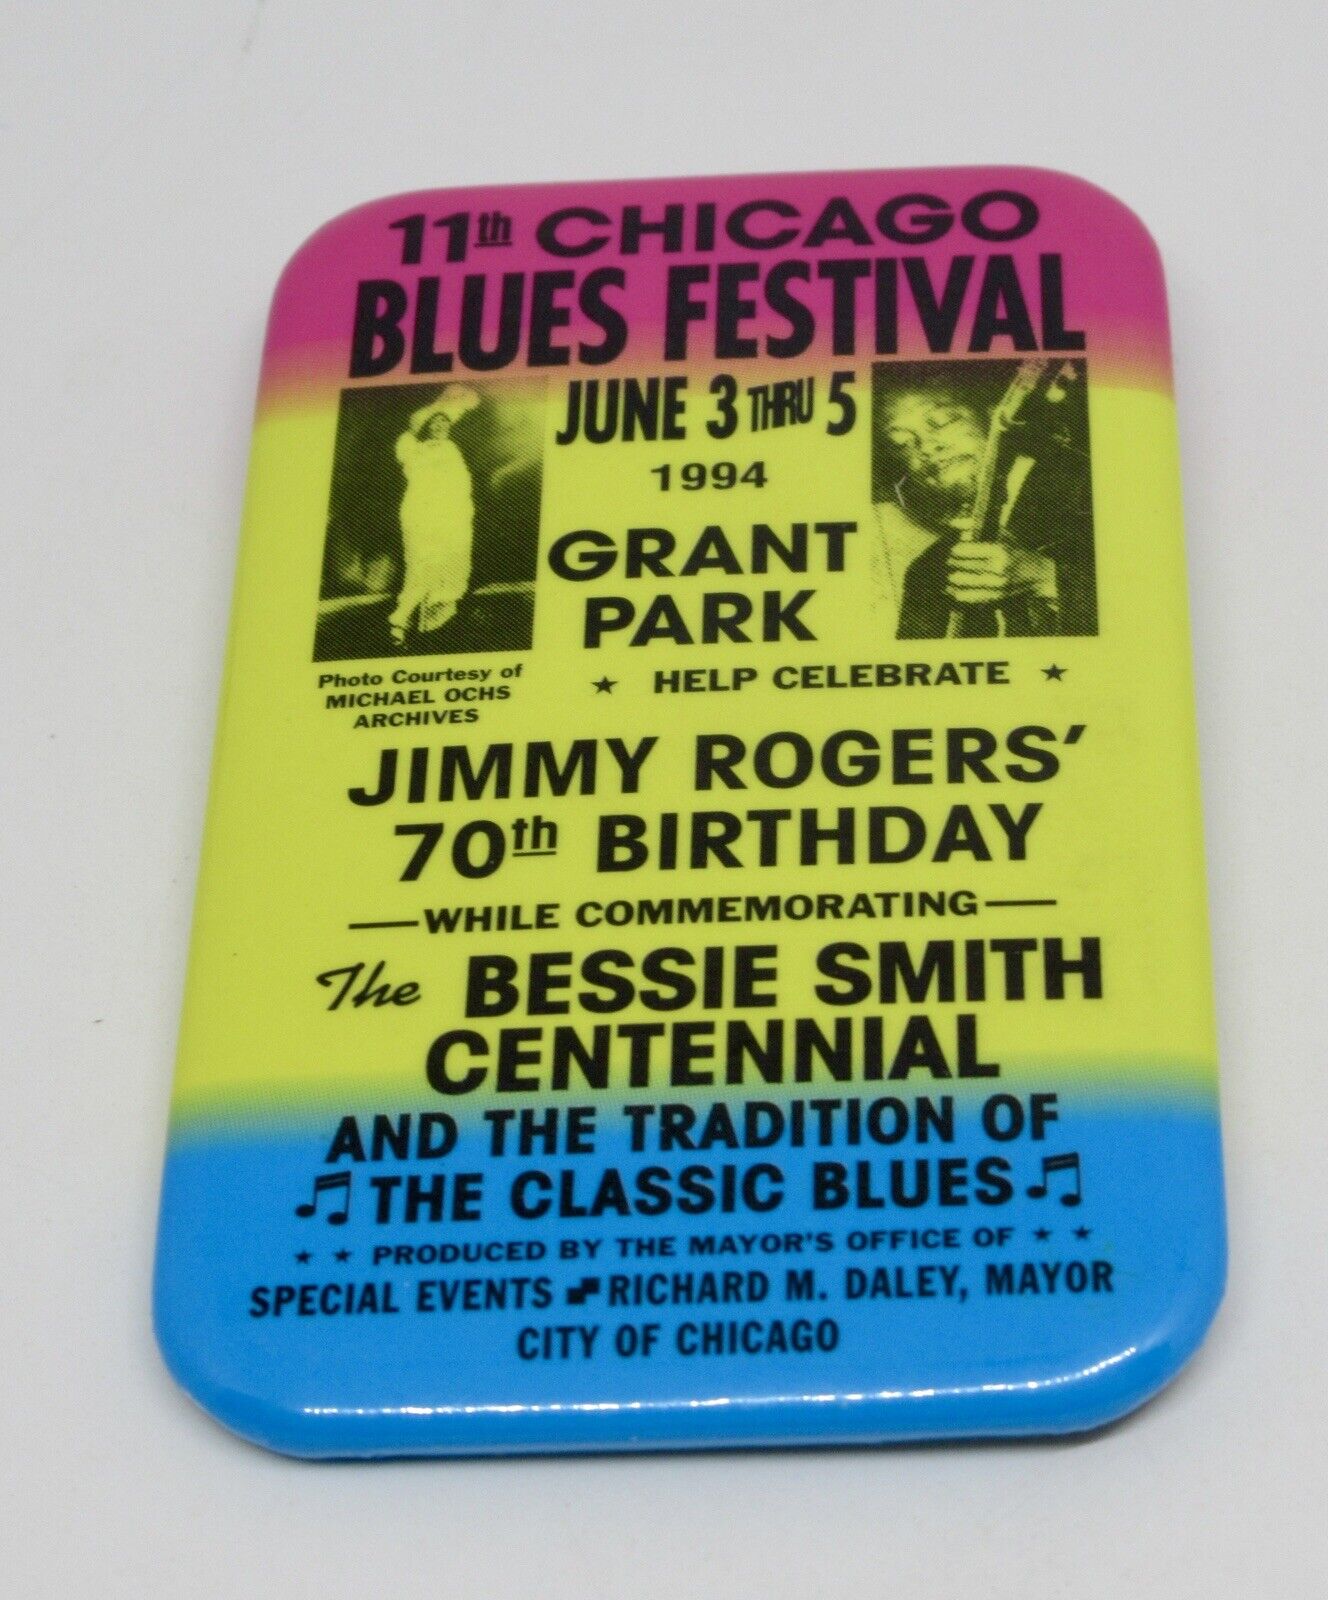 CHICAGO Blues Festival JUNE 3-5, 1994 Jimmy Rogers 70th Birthday 3x1 Pin Button